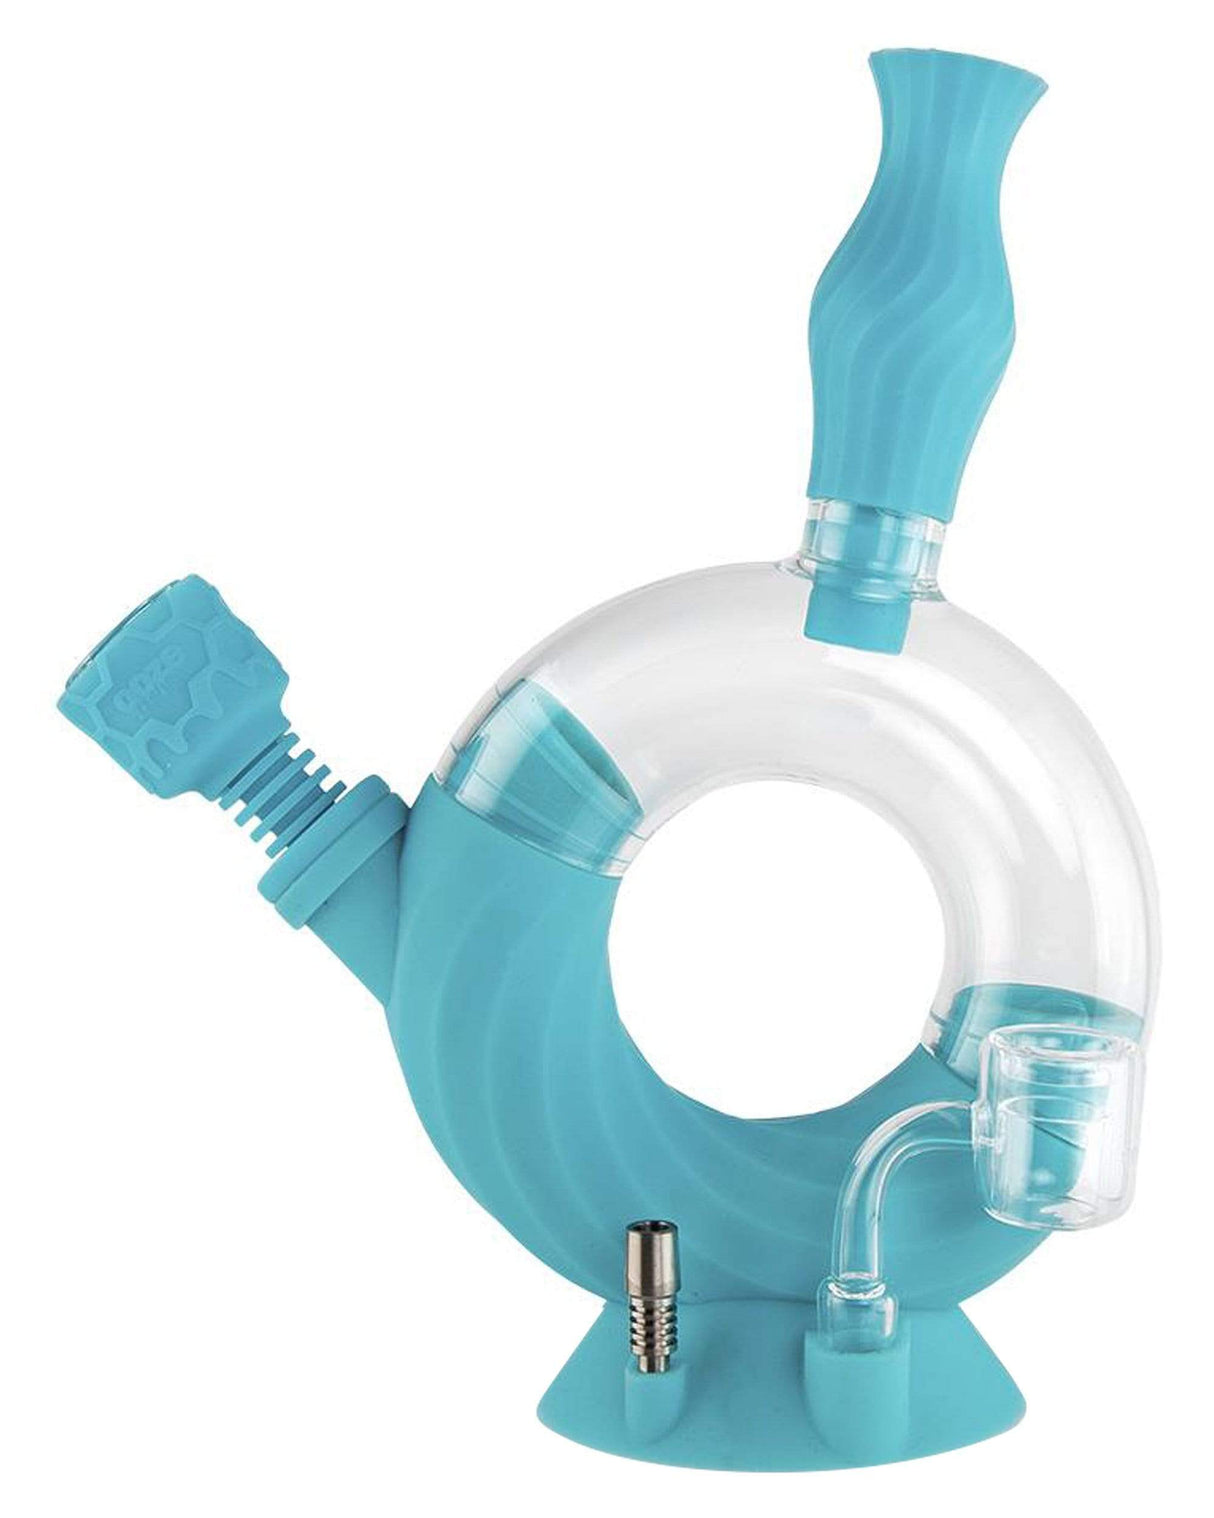 Ooze Ozone Silicone Bong in Aqua Teal with Borosilicate Glass and Slitted Percolator, Front View